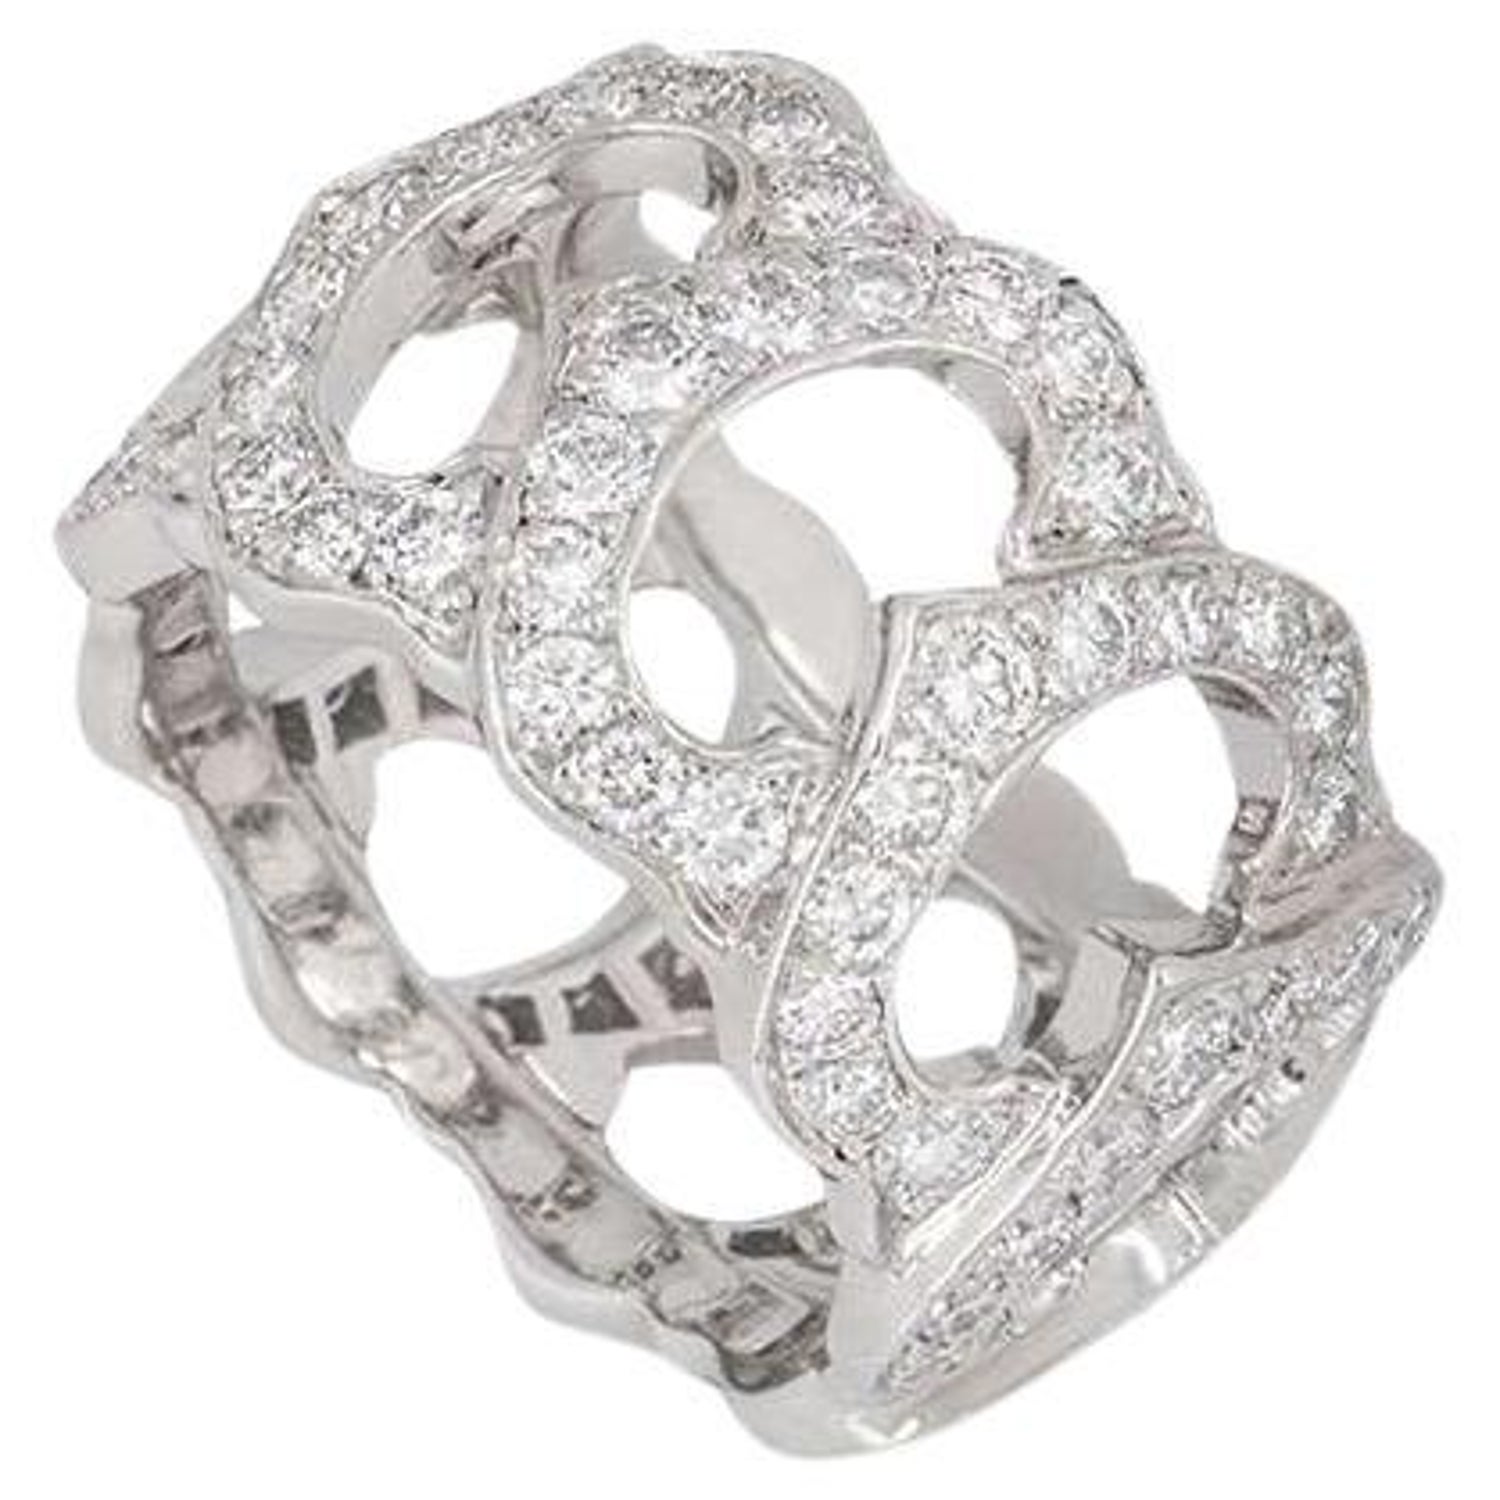 Louis Vuitton White Gold Empreinte Band Ring Available For Immediate Sale  At Sotheby's